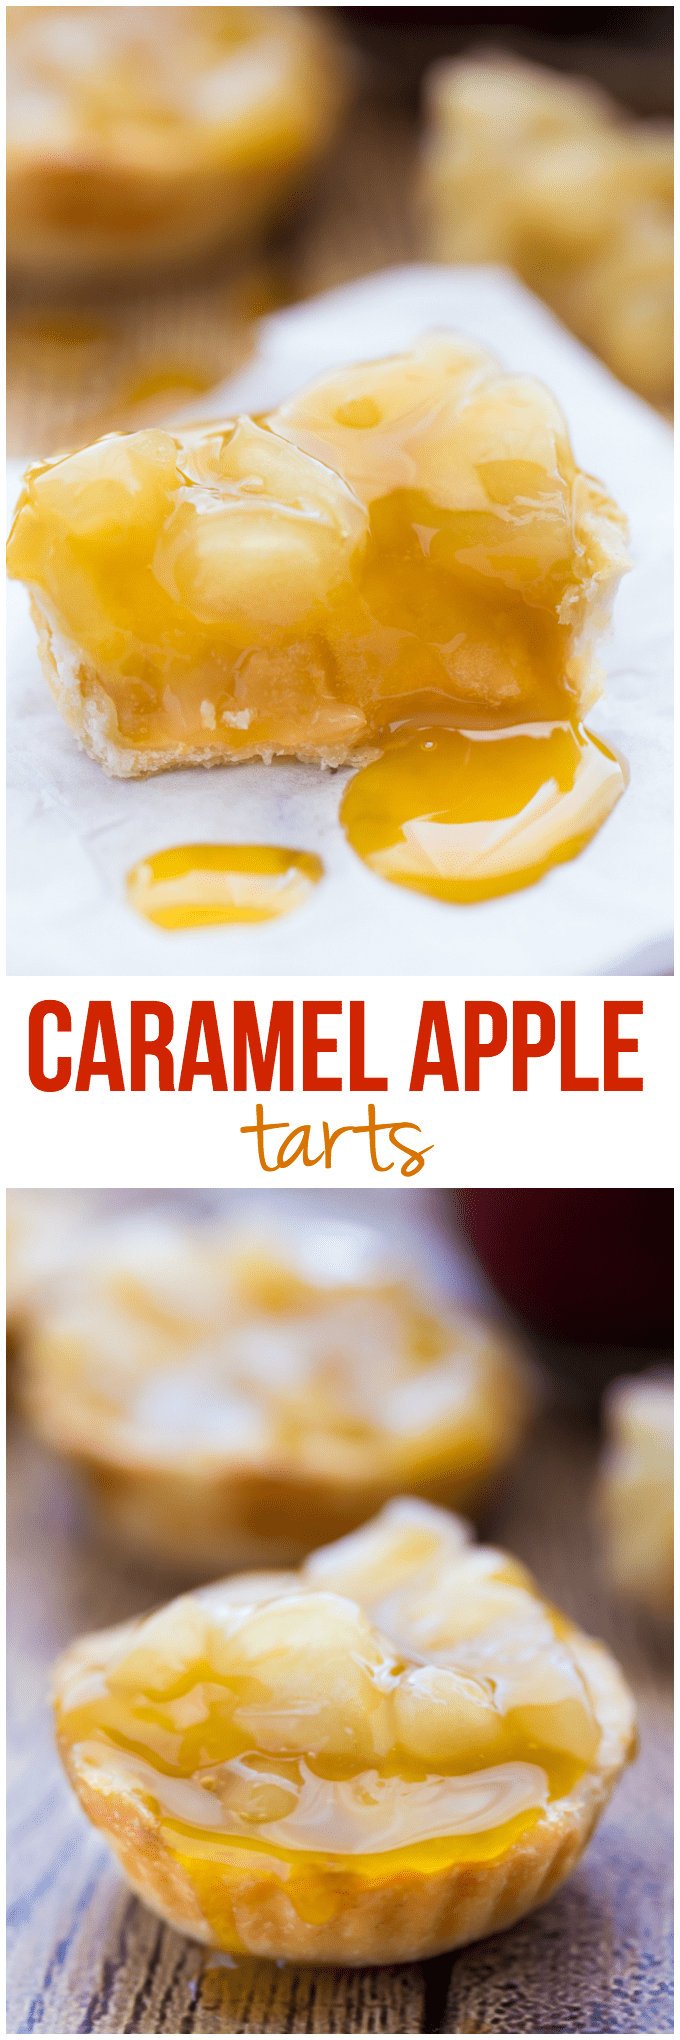 Caramel Apple Tarts - Sticky, sweet and easy to make with only three ingredients. This one's for my caramel loving friends!